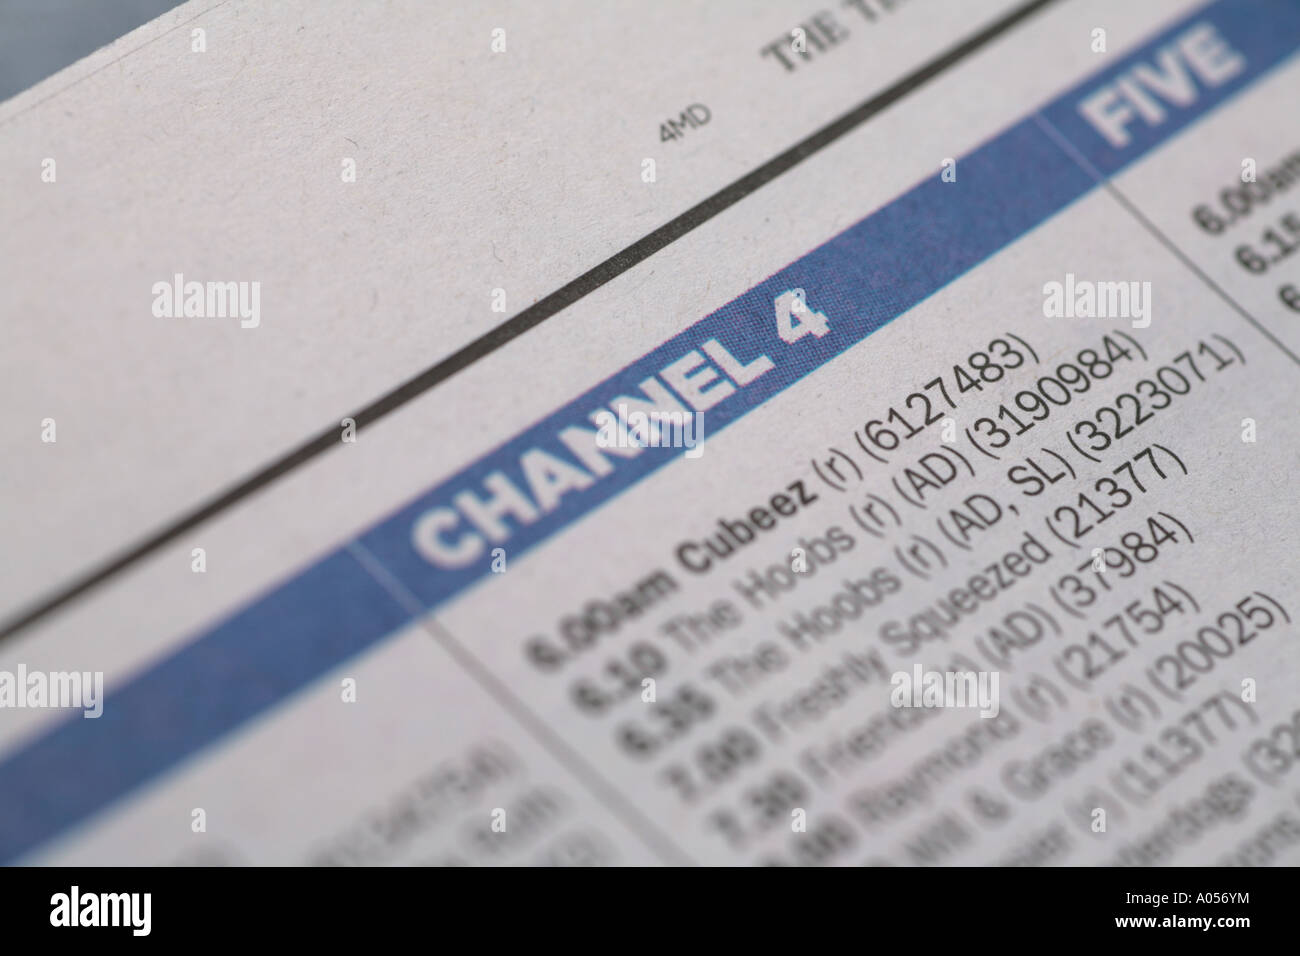 Channel 4 TV listings Stock Photo - Alamy